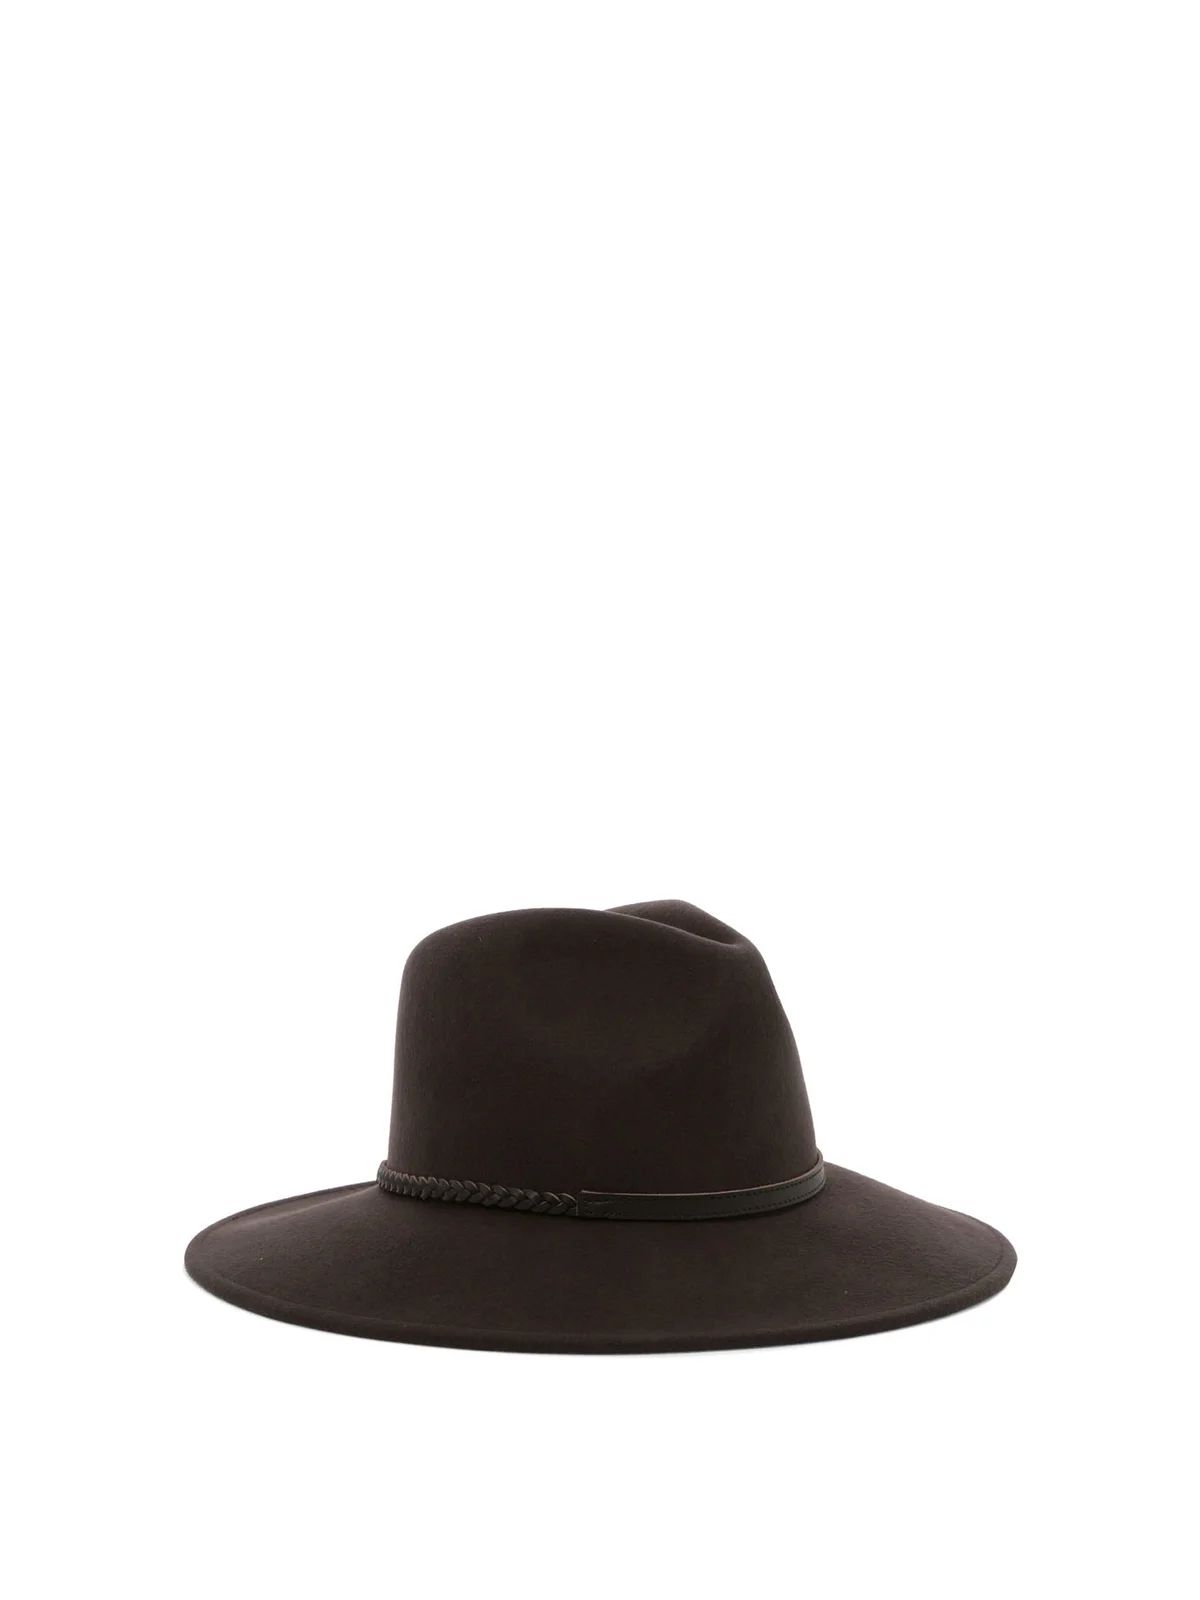 Barbour Tack Fedora Hat | Cettire Global